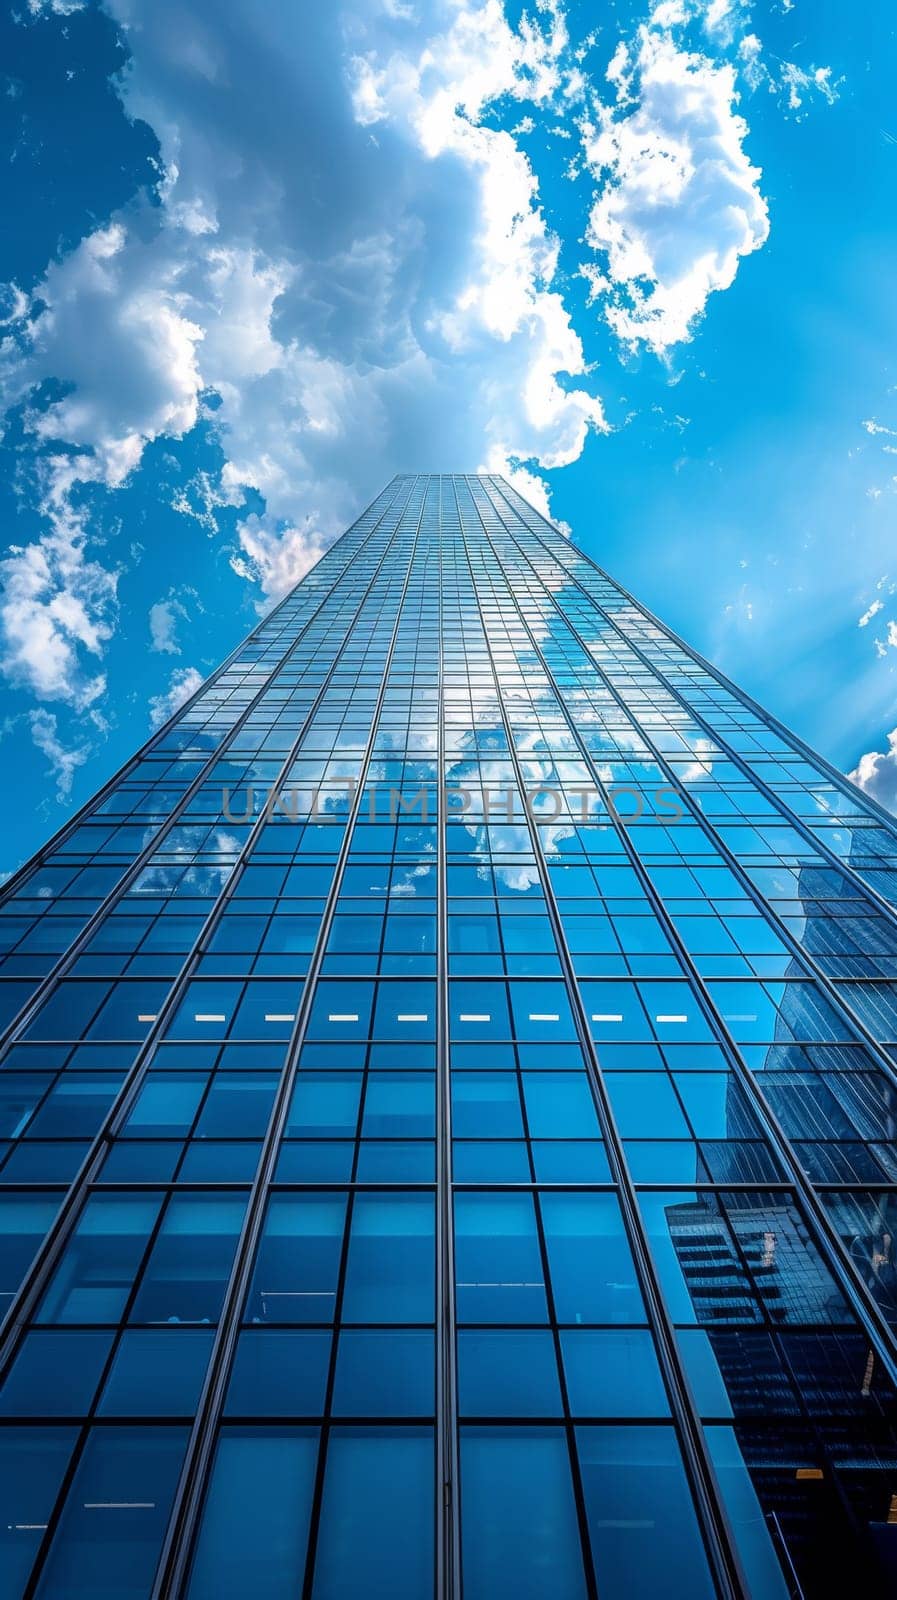 A view of a tall building with lots of windows and clouds